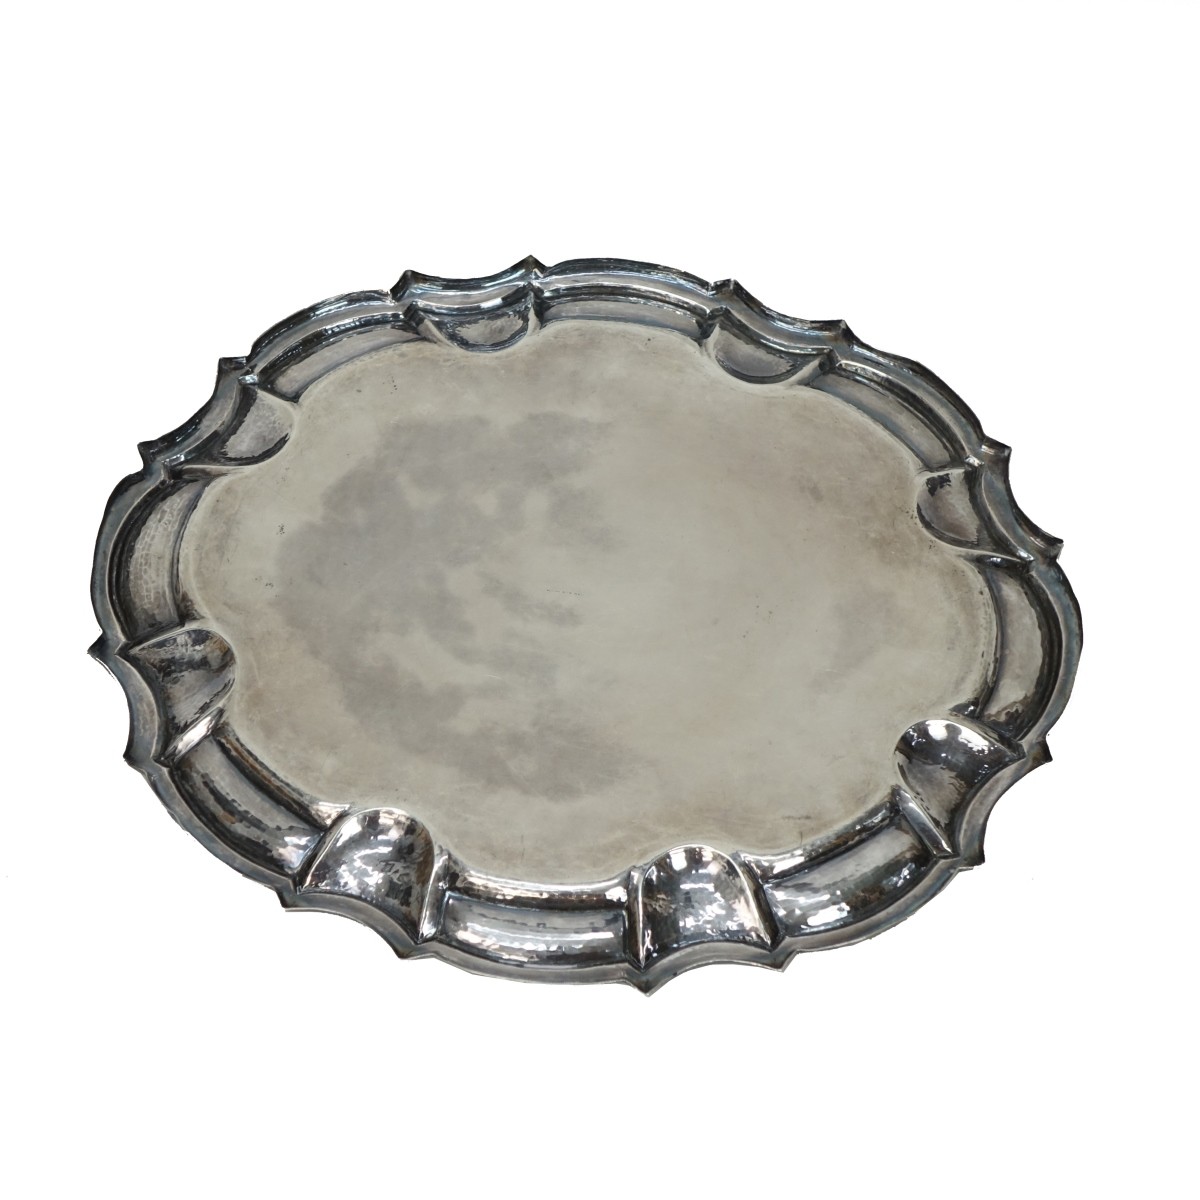 Buccellati Sterling Silver Serving Tray